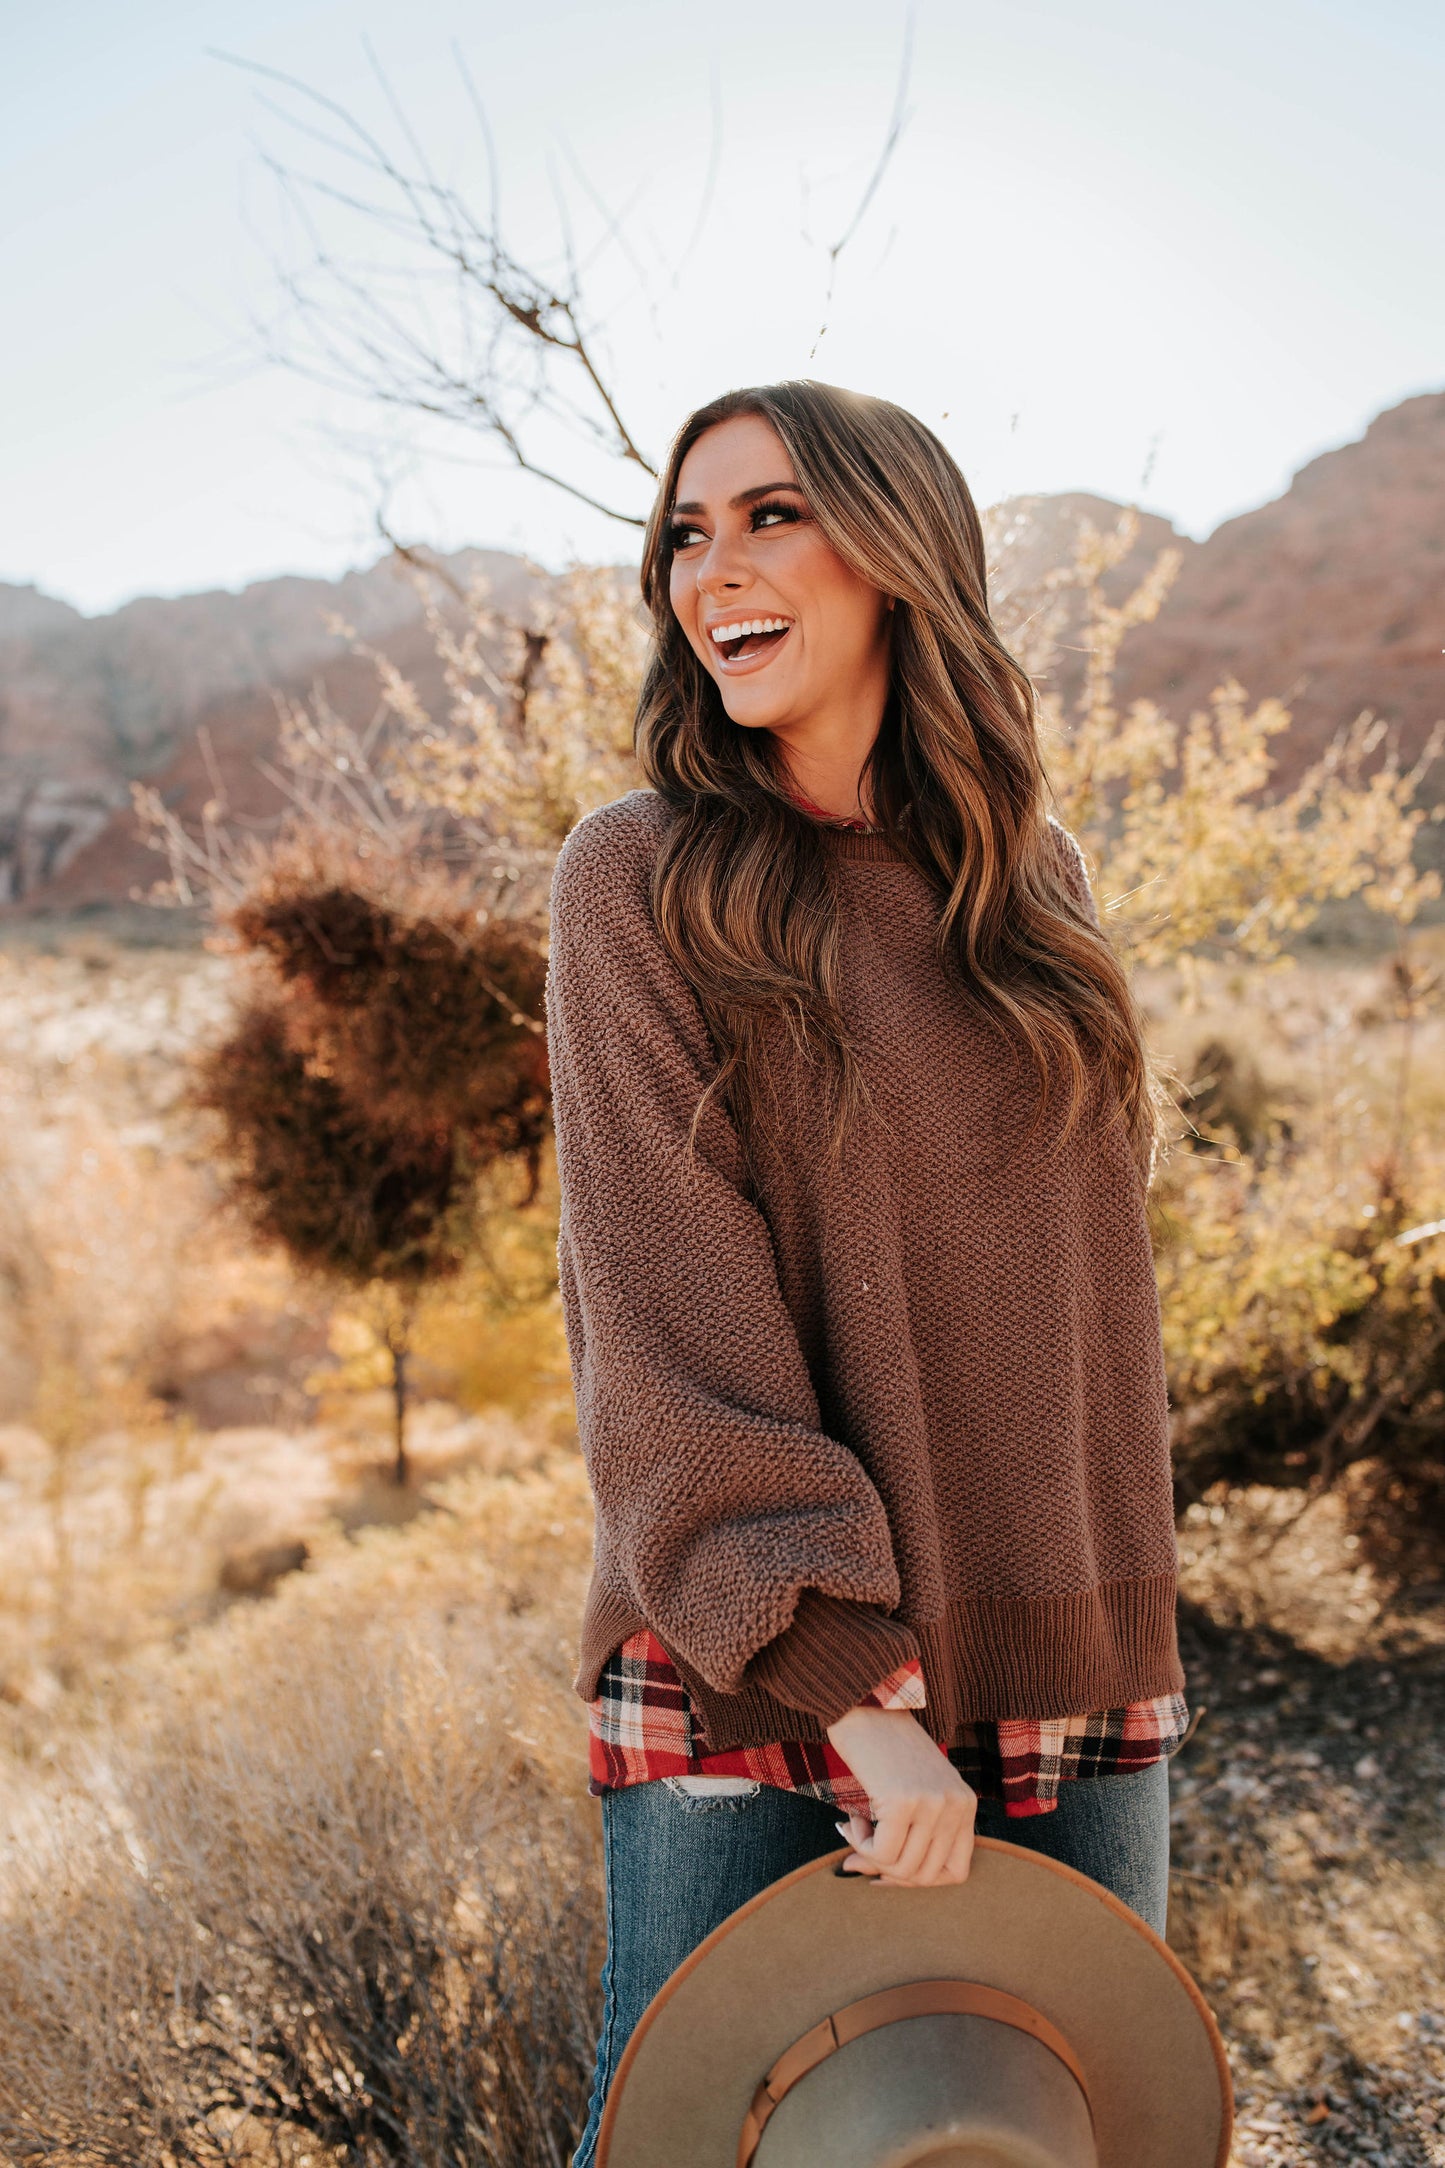 THE CHESNEY KNITTED PULLOVER IN CHOCOLATE